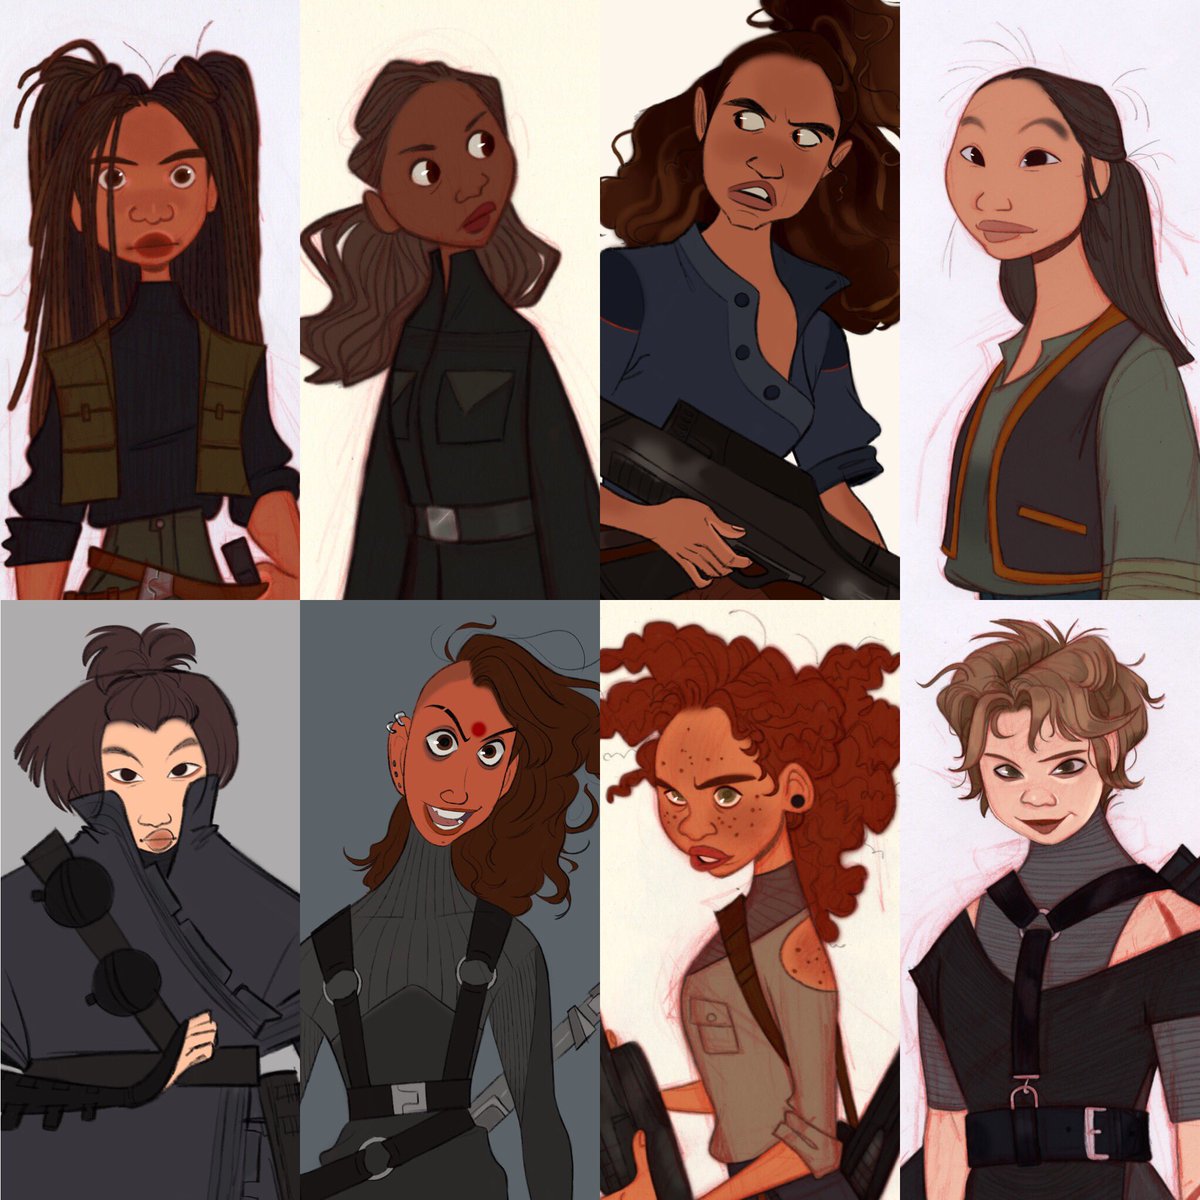 I was a little salty at the redundancy of female Star Wars characters, so I made my own